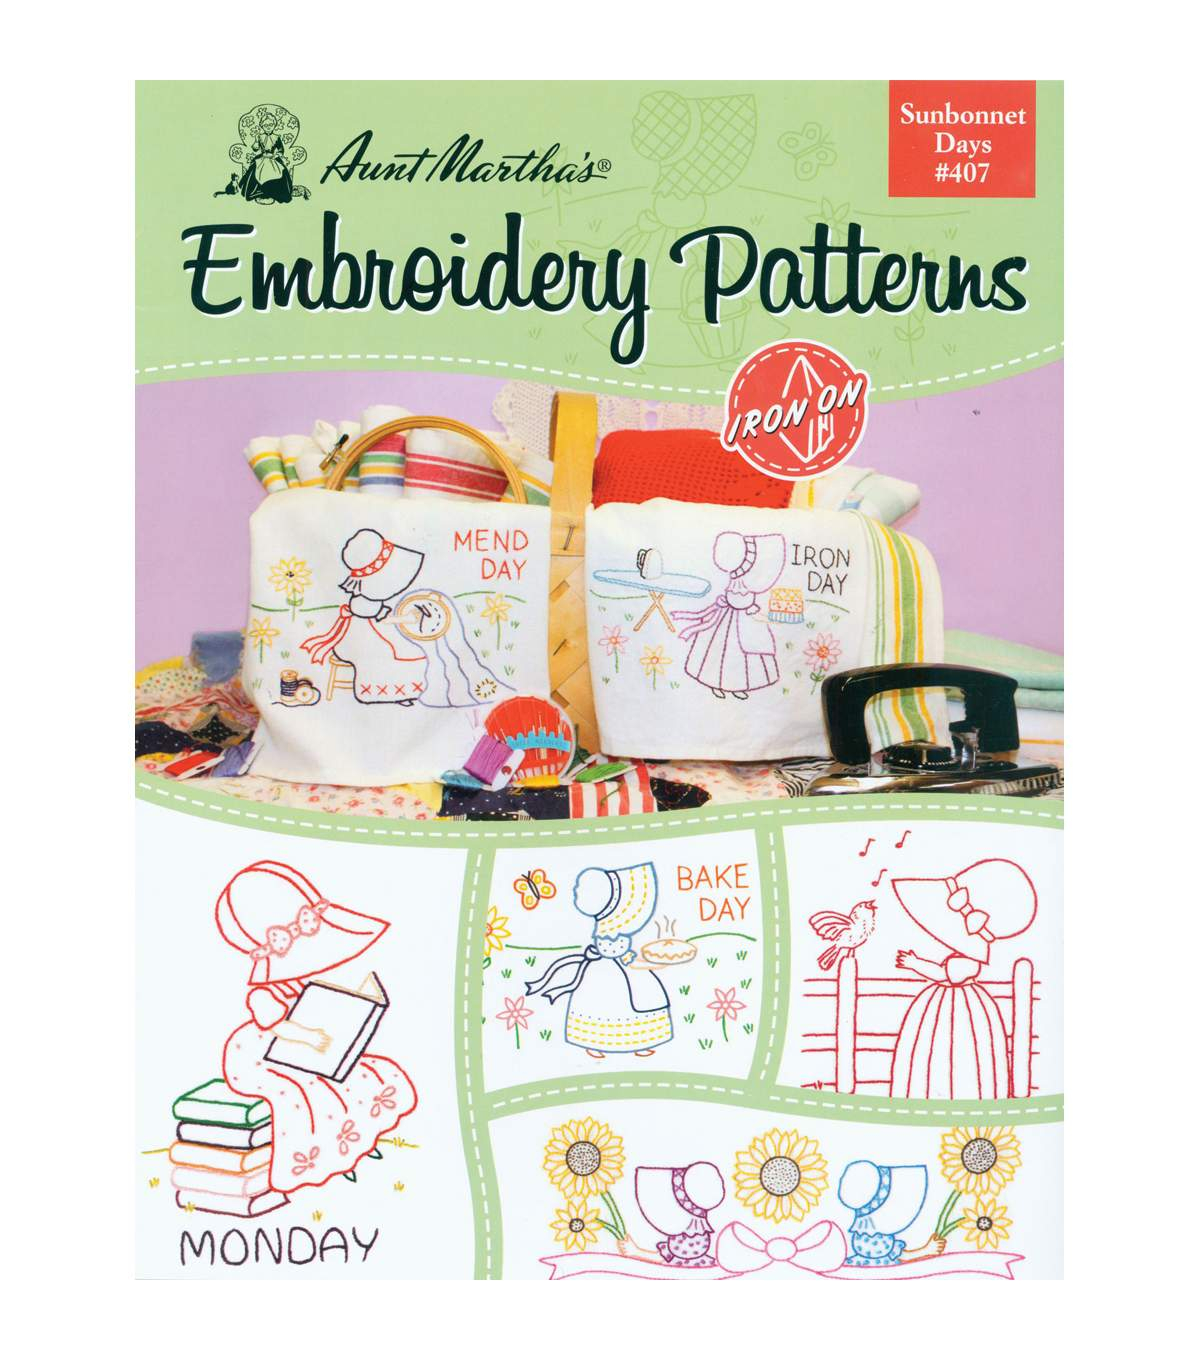 Embroidery Pattern Books Aunt Marthas Colonial Patterns Iron On Transfer Books Sunbonnet Days